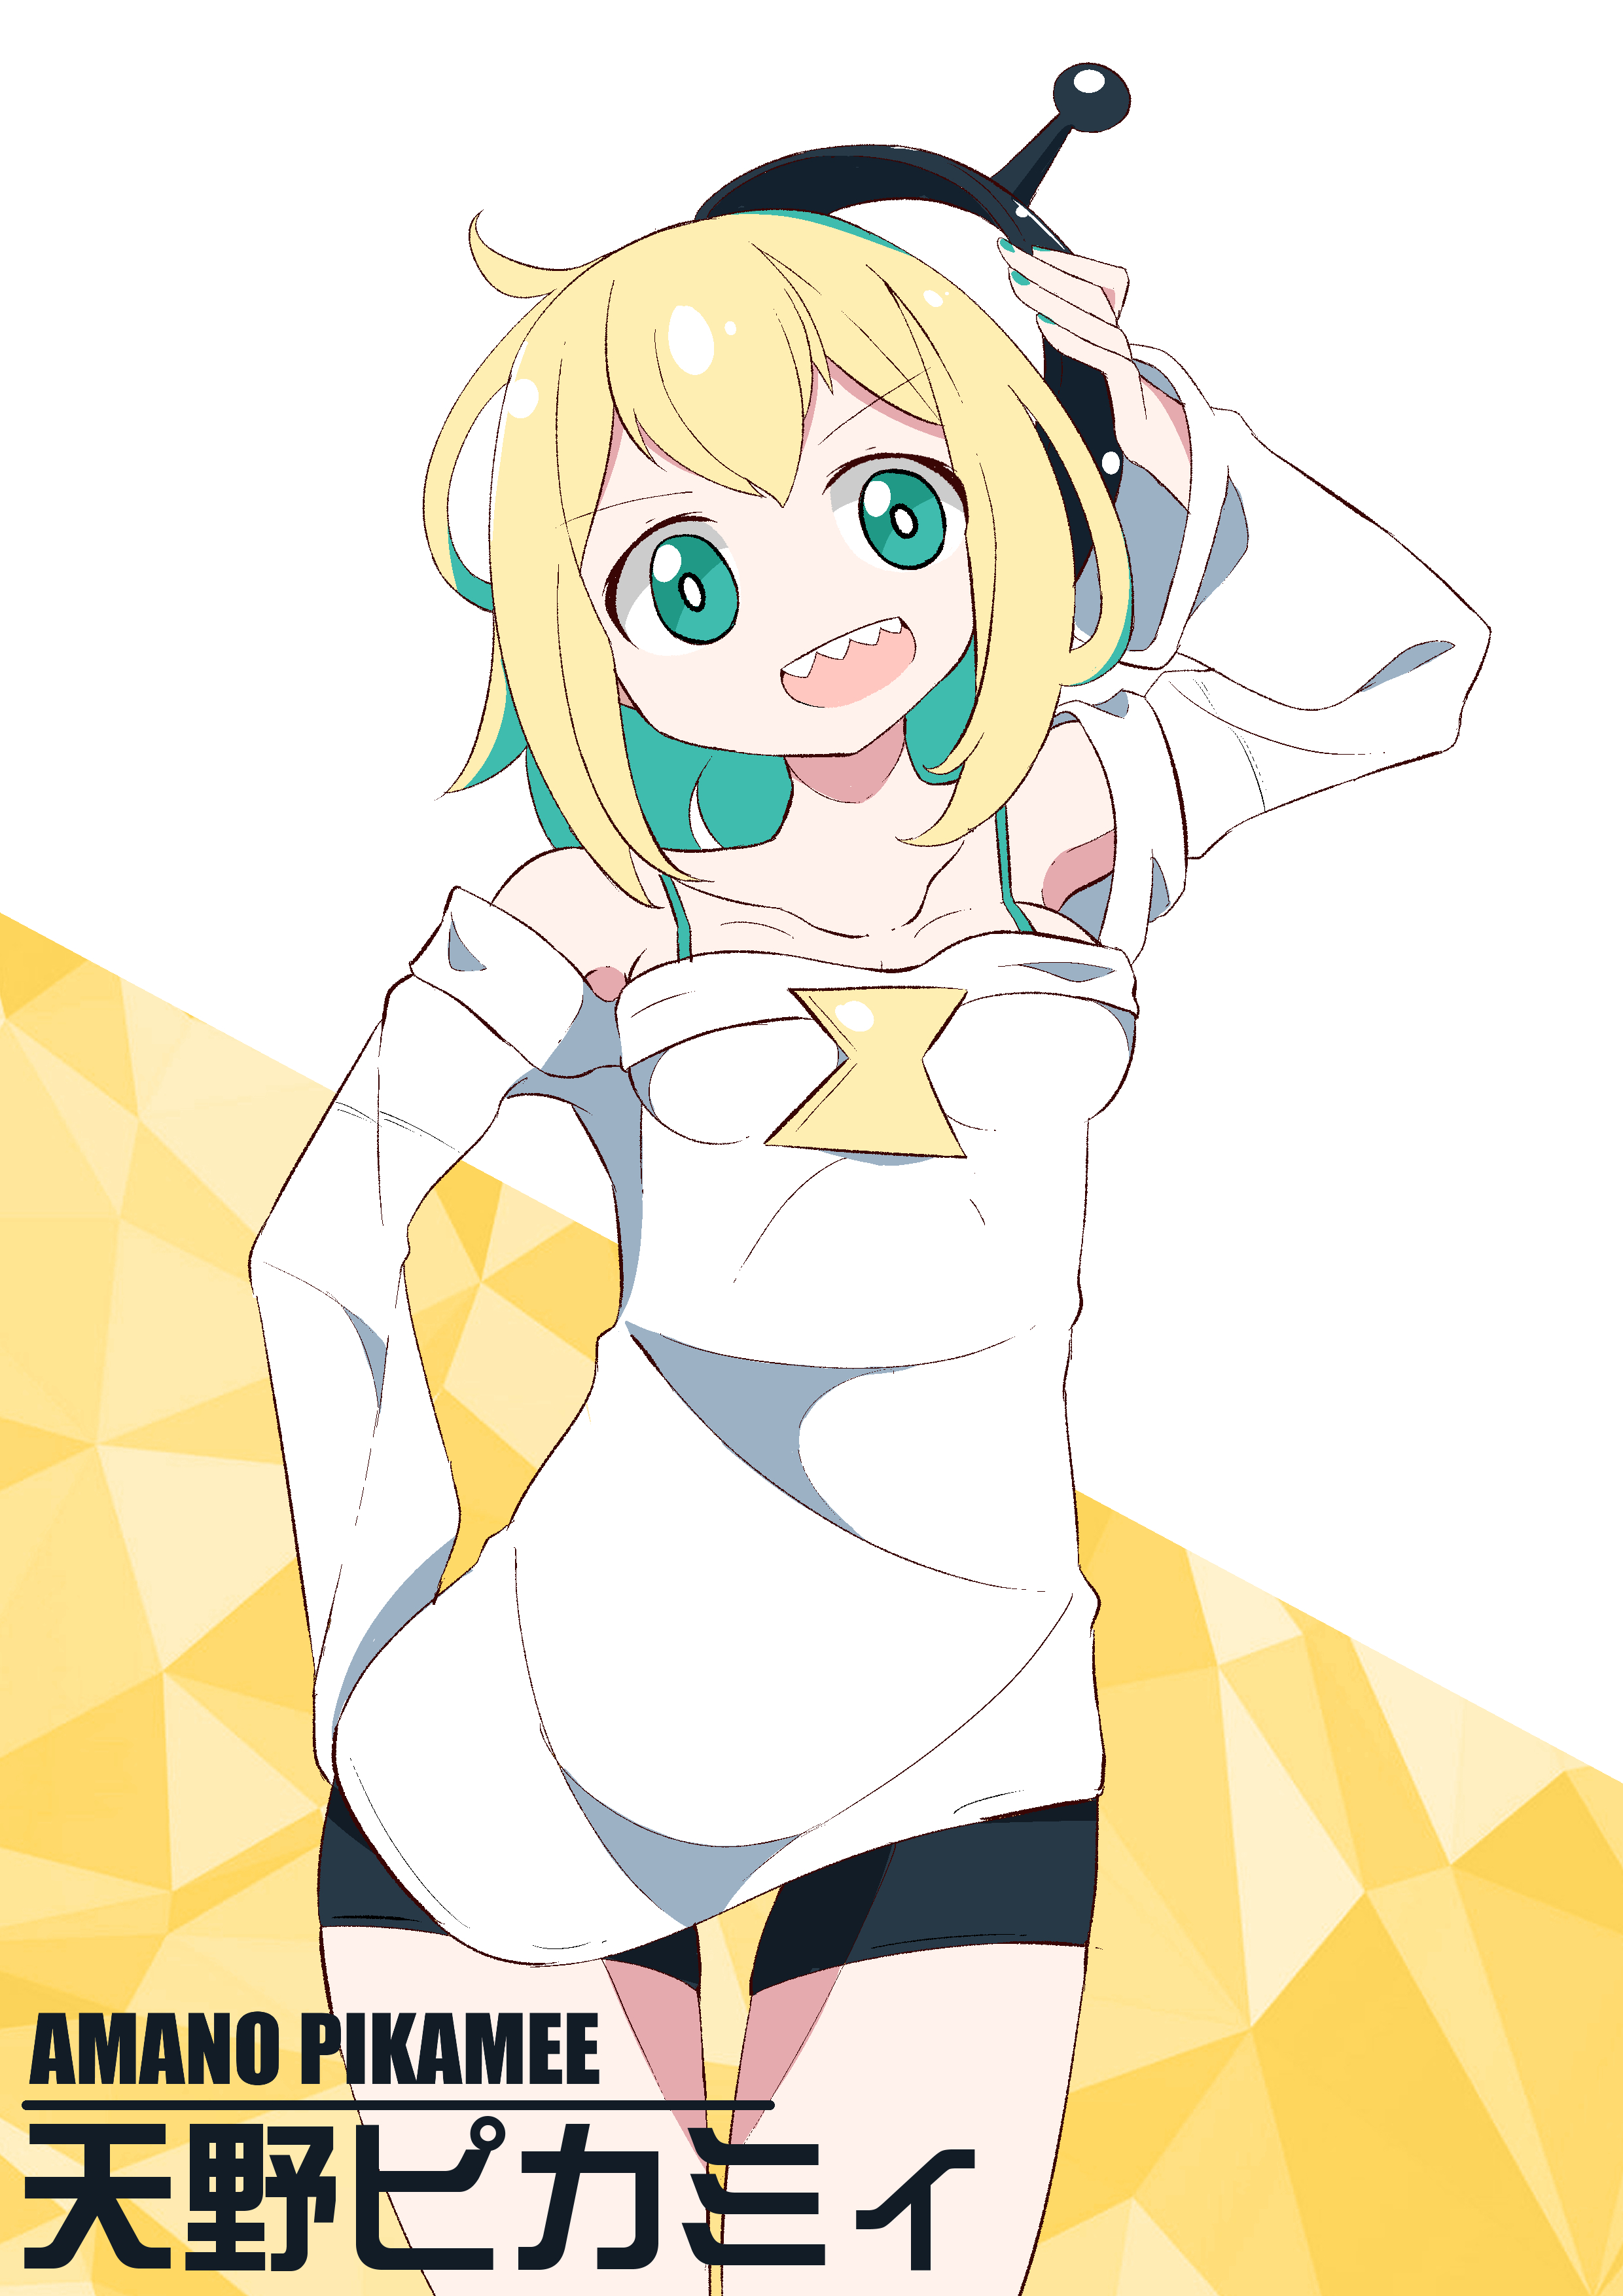 Li King on X: This is Amano Pikamee, the Vtuber designed by r  GYARI. She's very good at English and use both Janpanese and English in her   stream. If anyone like